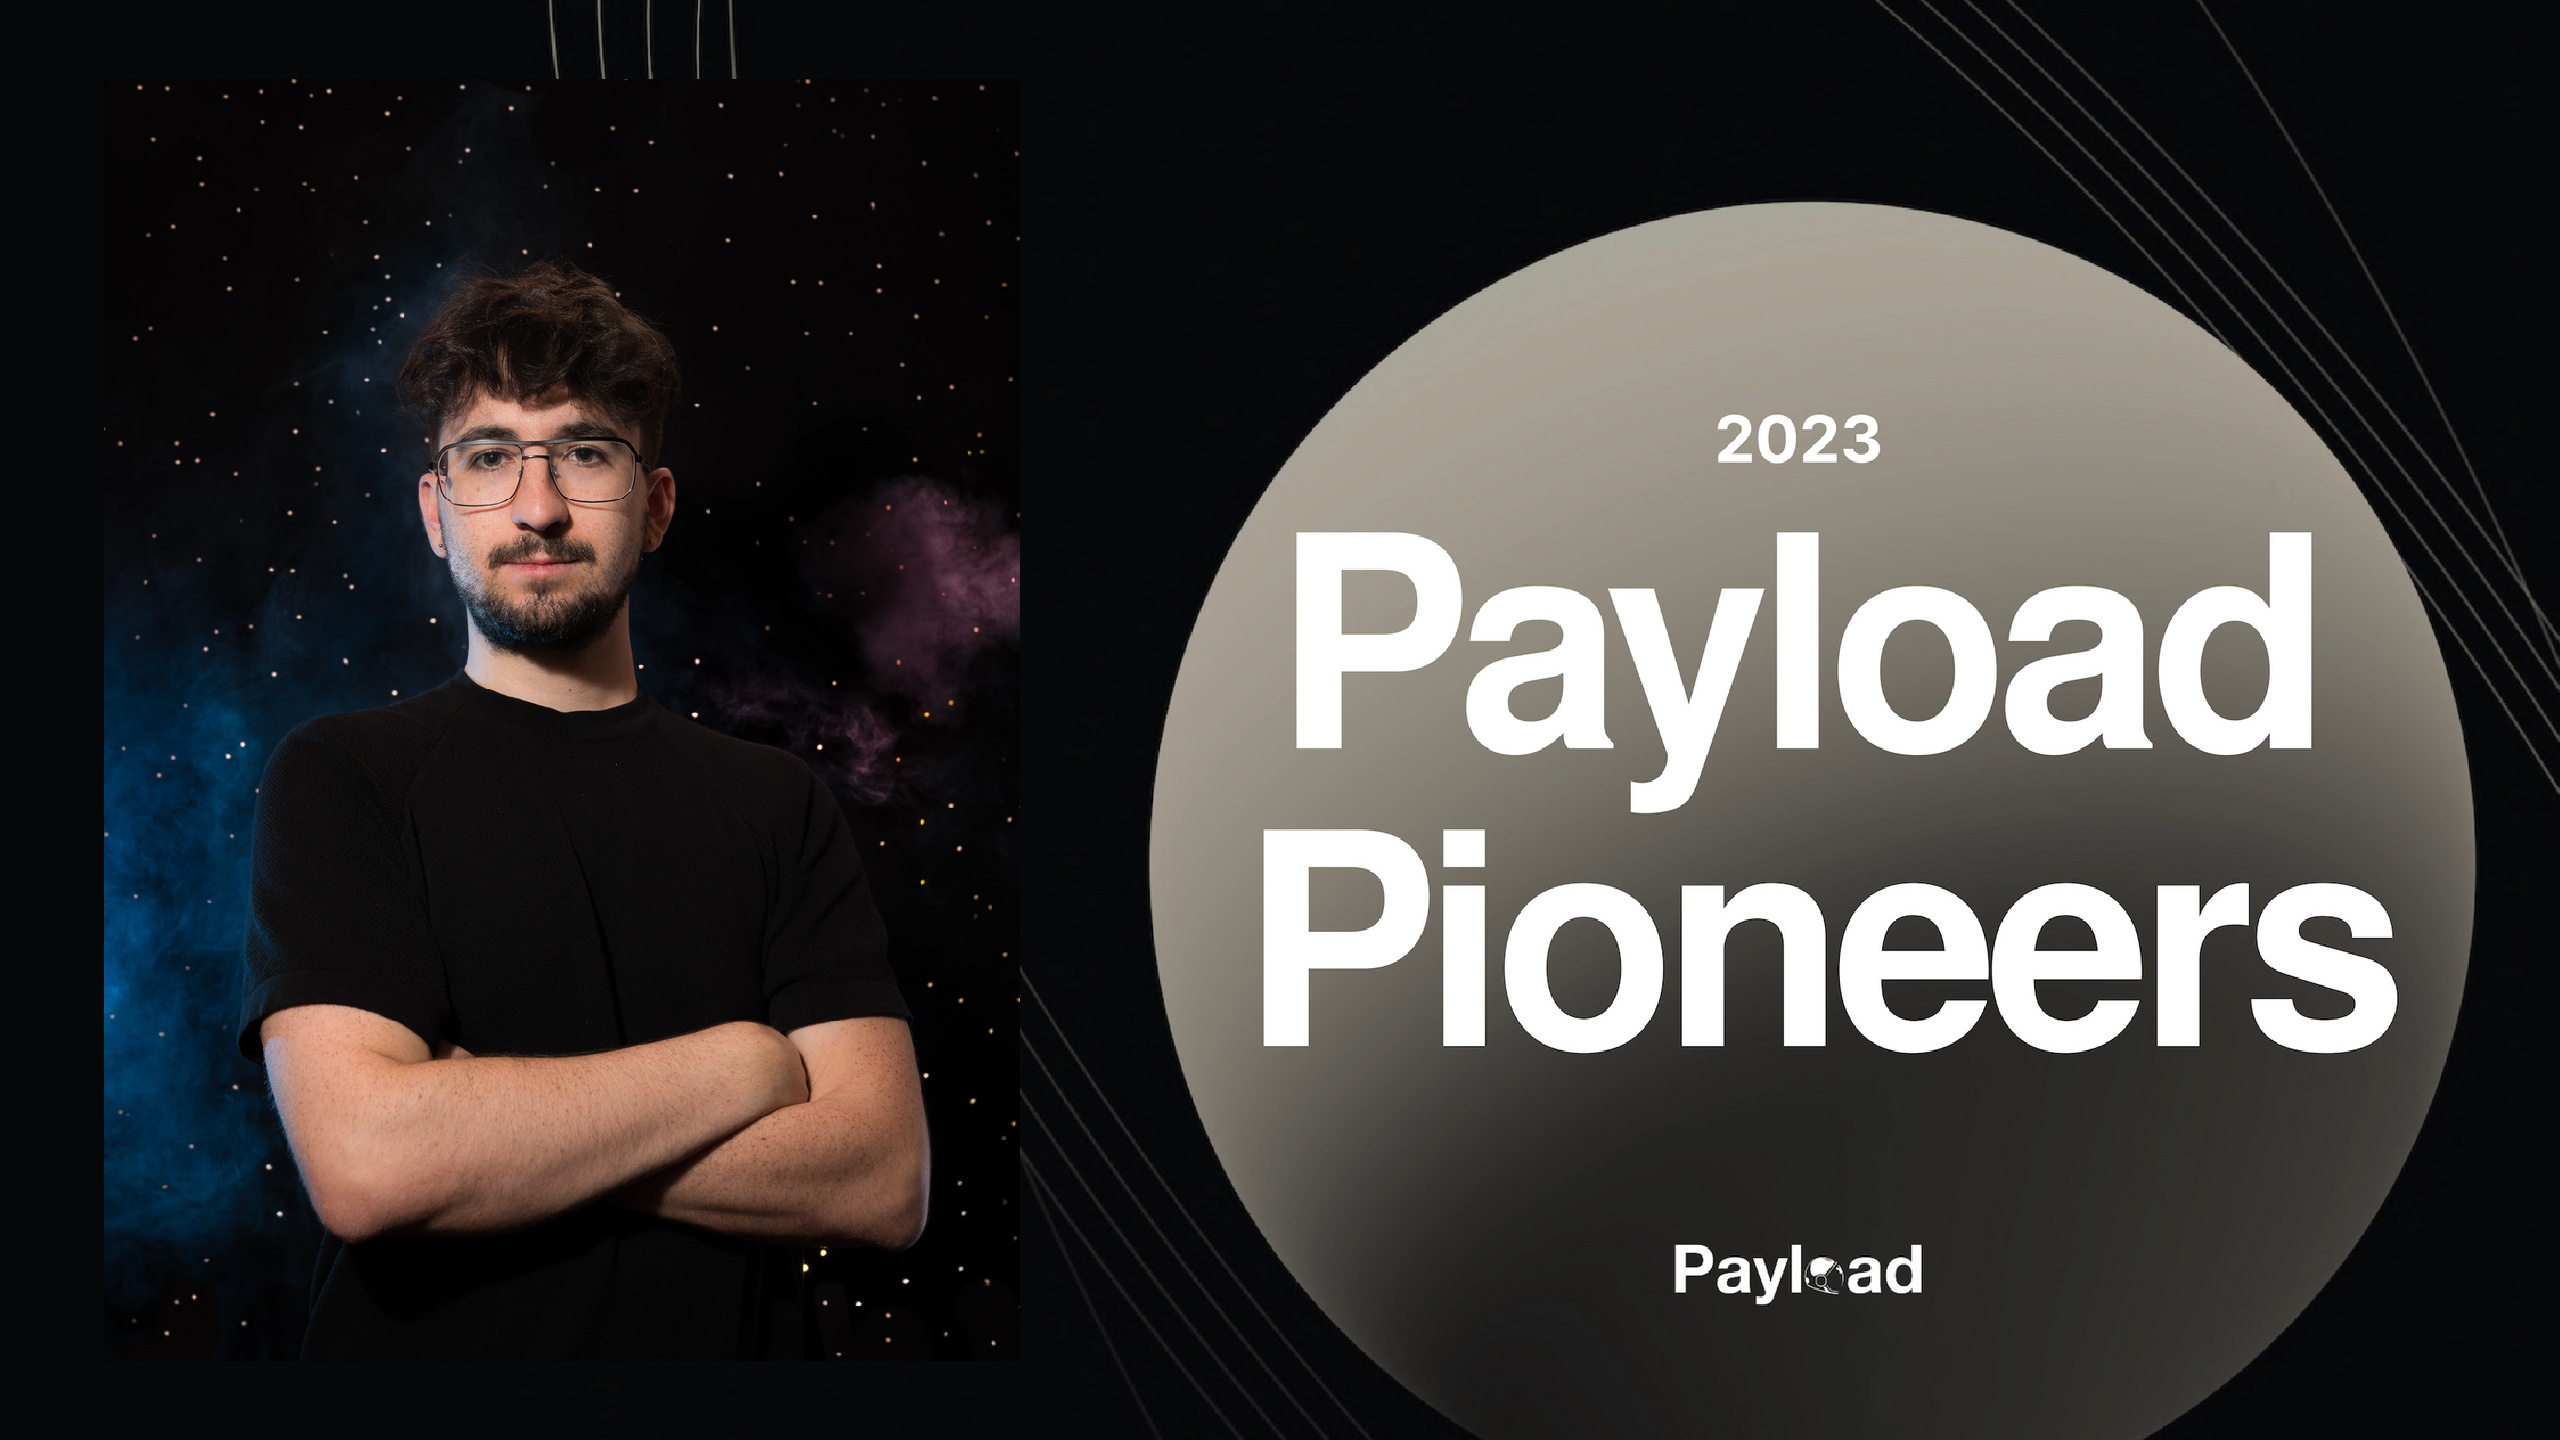 Payload Pioneers 2023: Patrick Finley